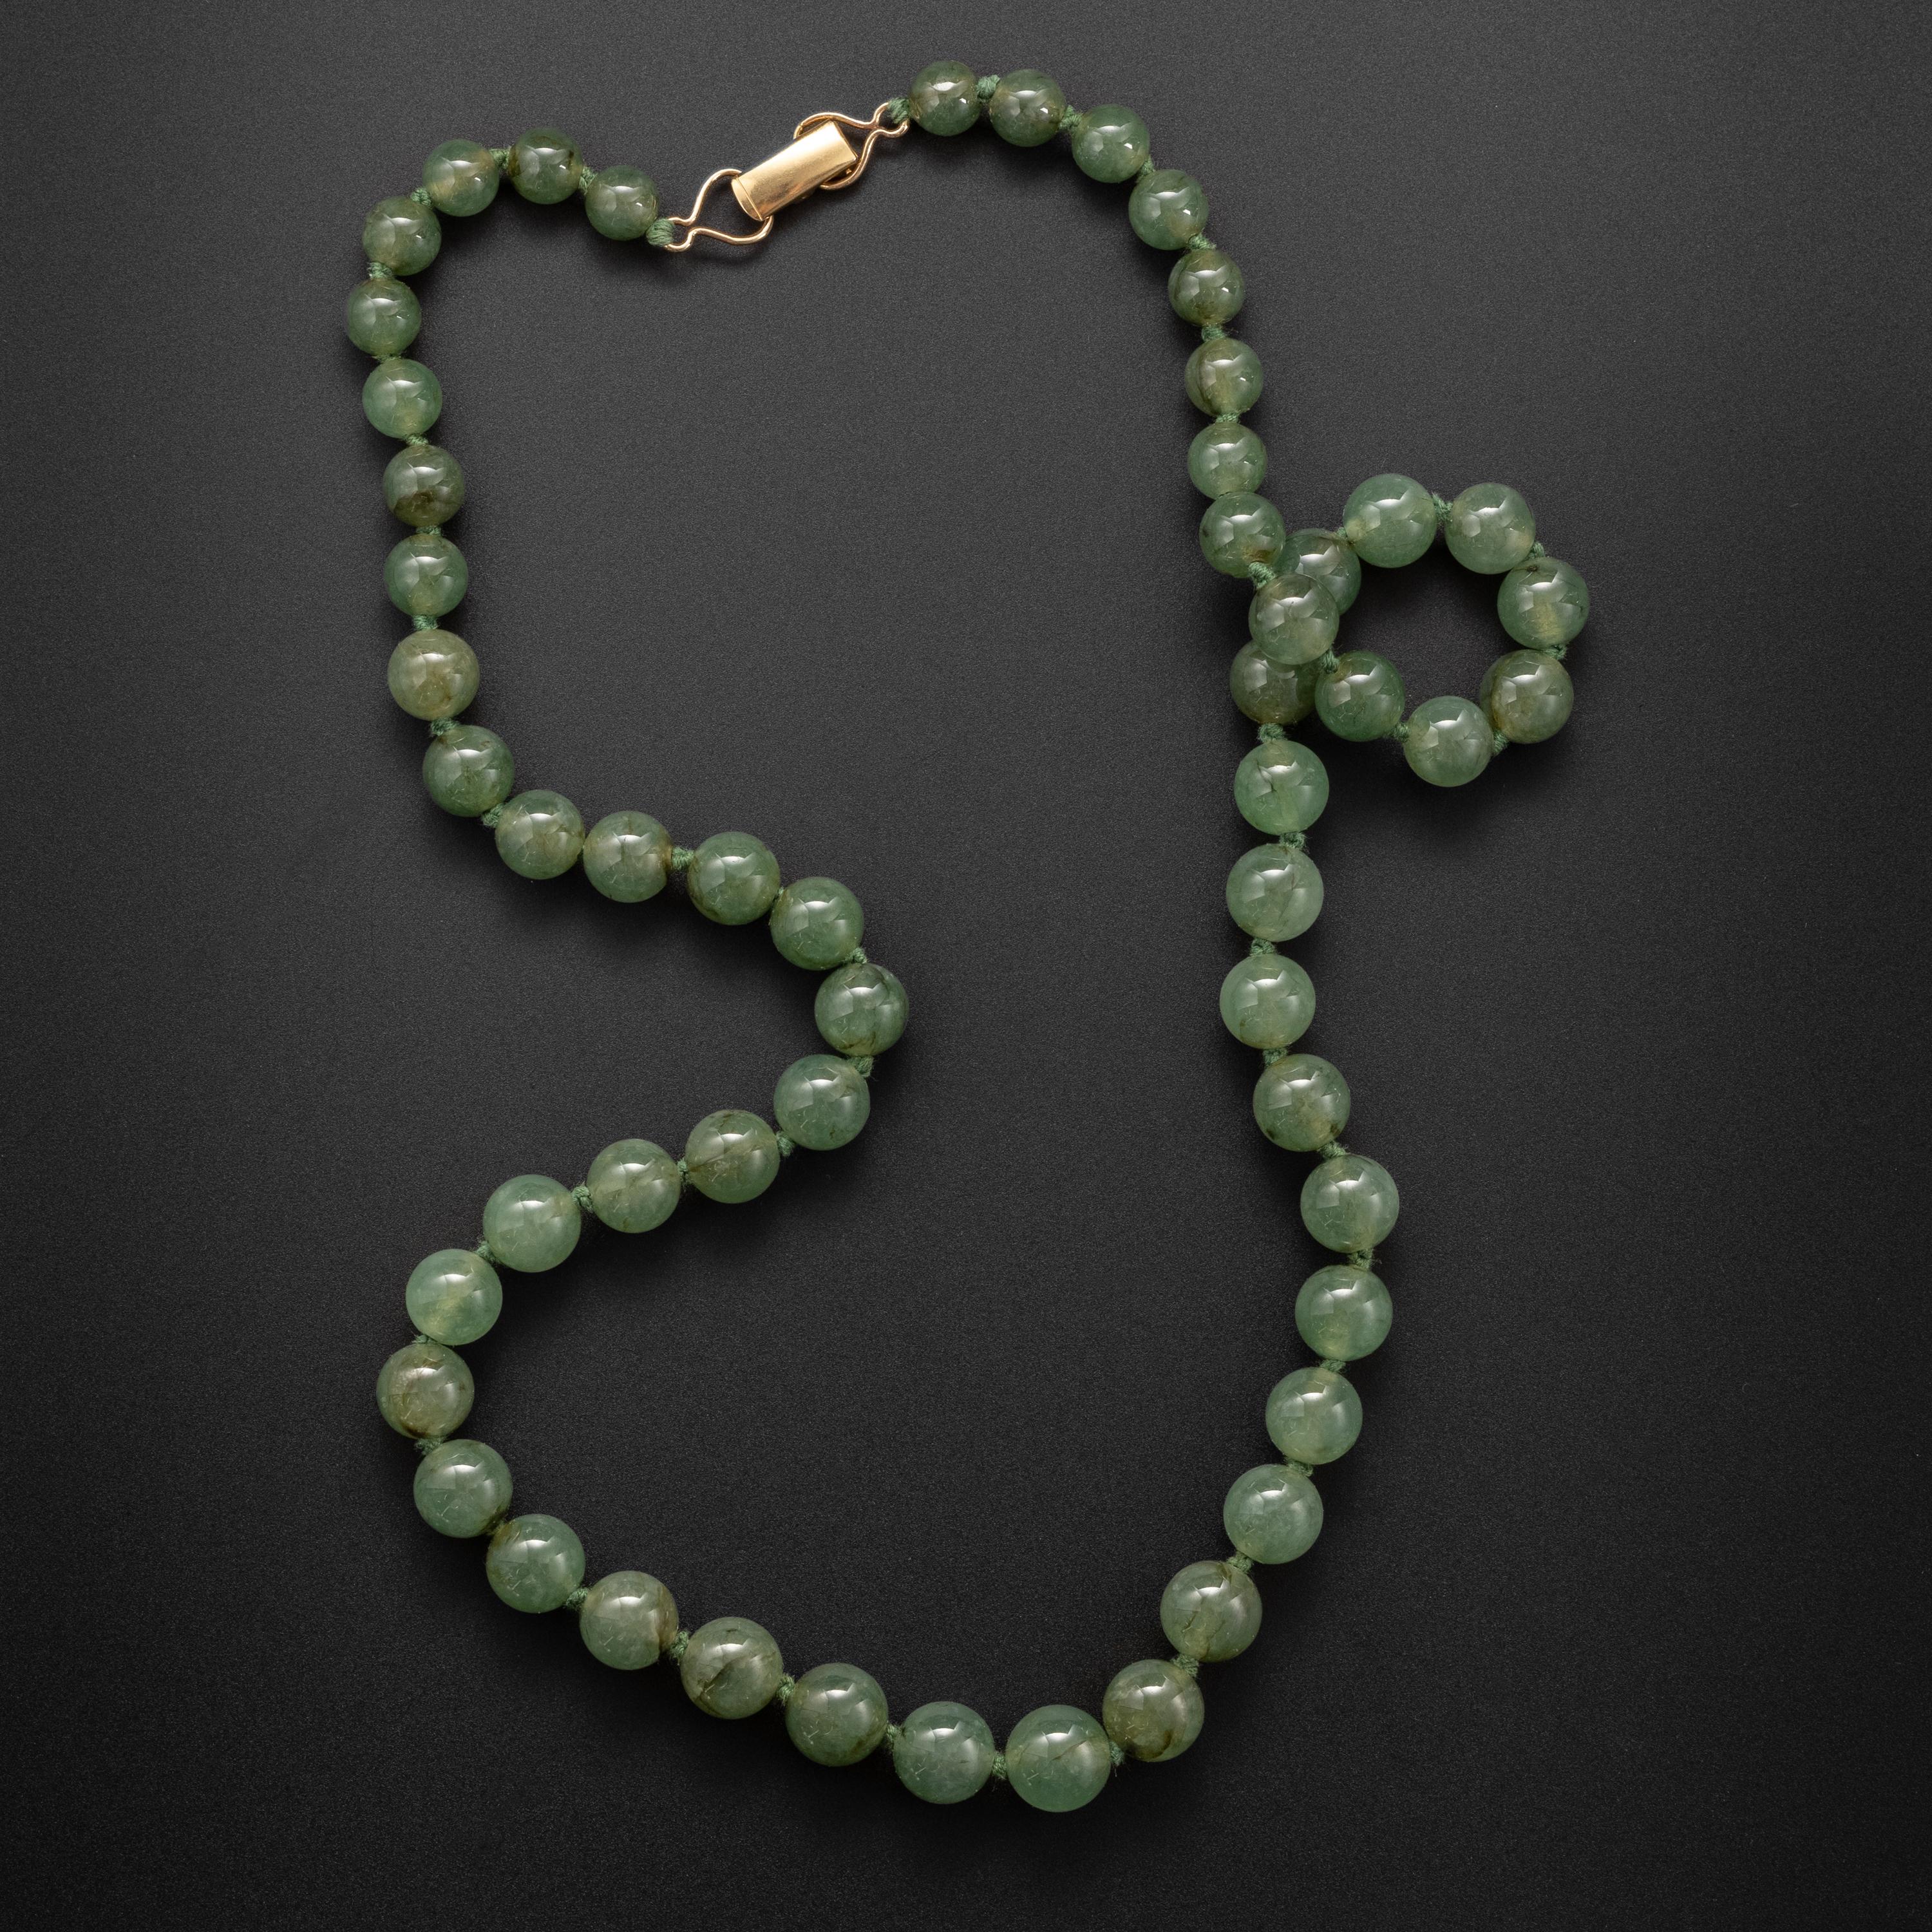 55 succulent, watery light sage green jadeite jade beads have been strung together on sturdy natural cord, knotted between each bead, and finished with a simple clasp in this distinctive, fetching necklace by revered Hawaiian jeweler, Ming's. Though